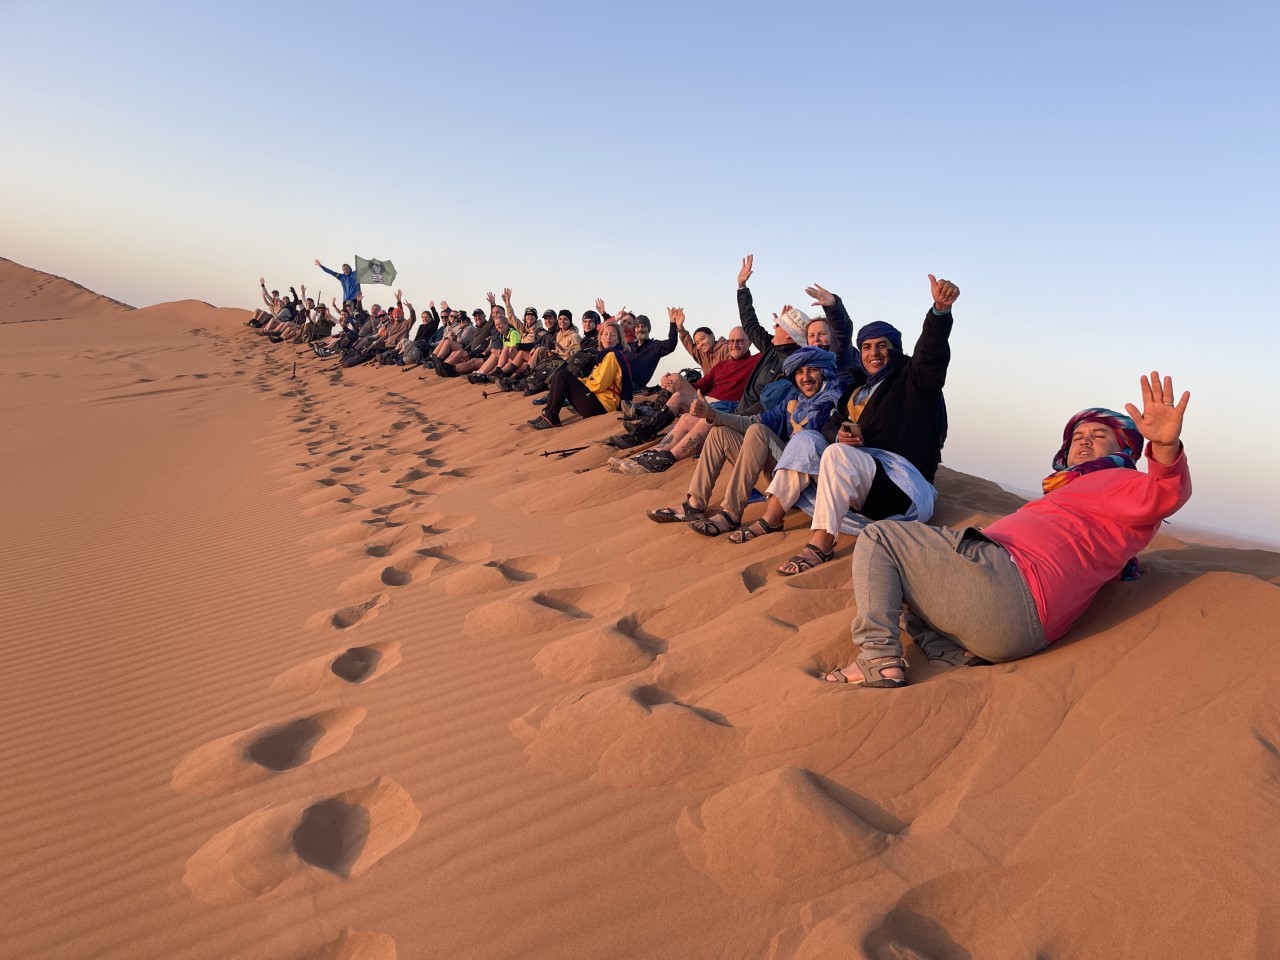 50 trekkers from all over the world joined Jules Peters for the trek